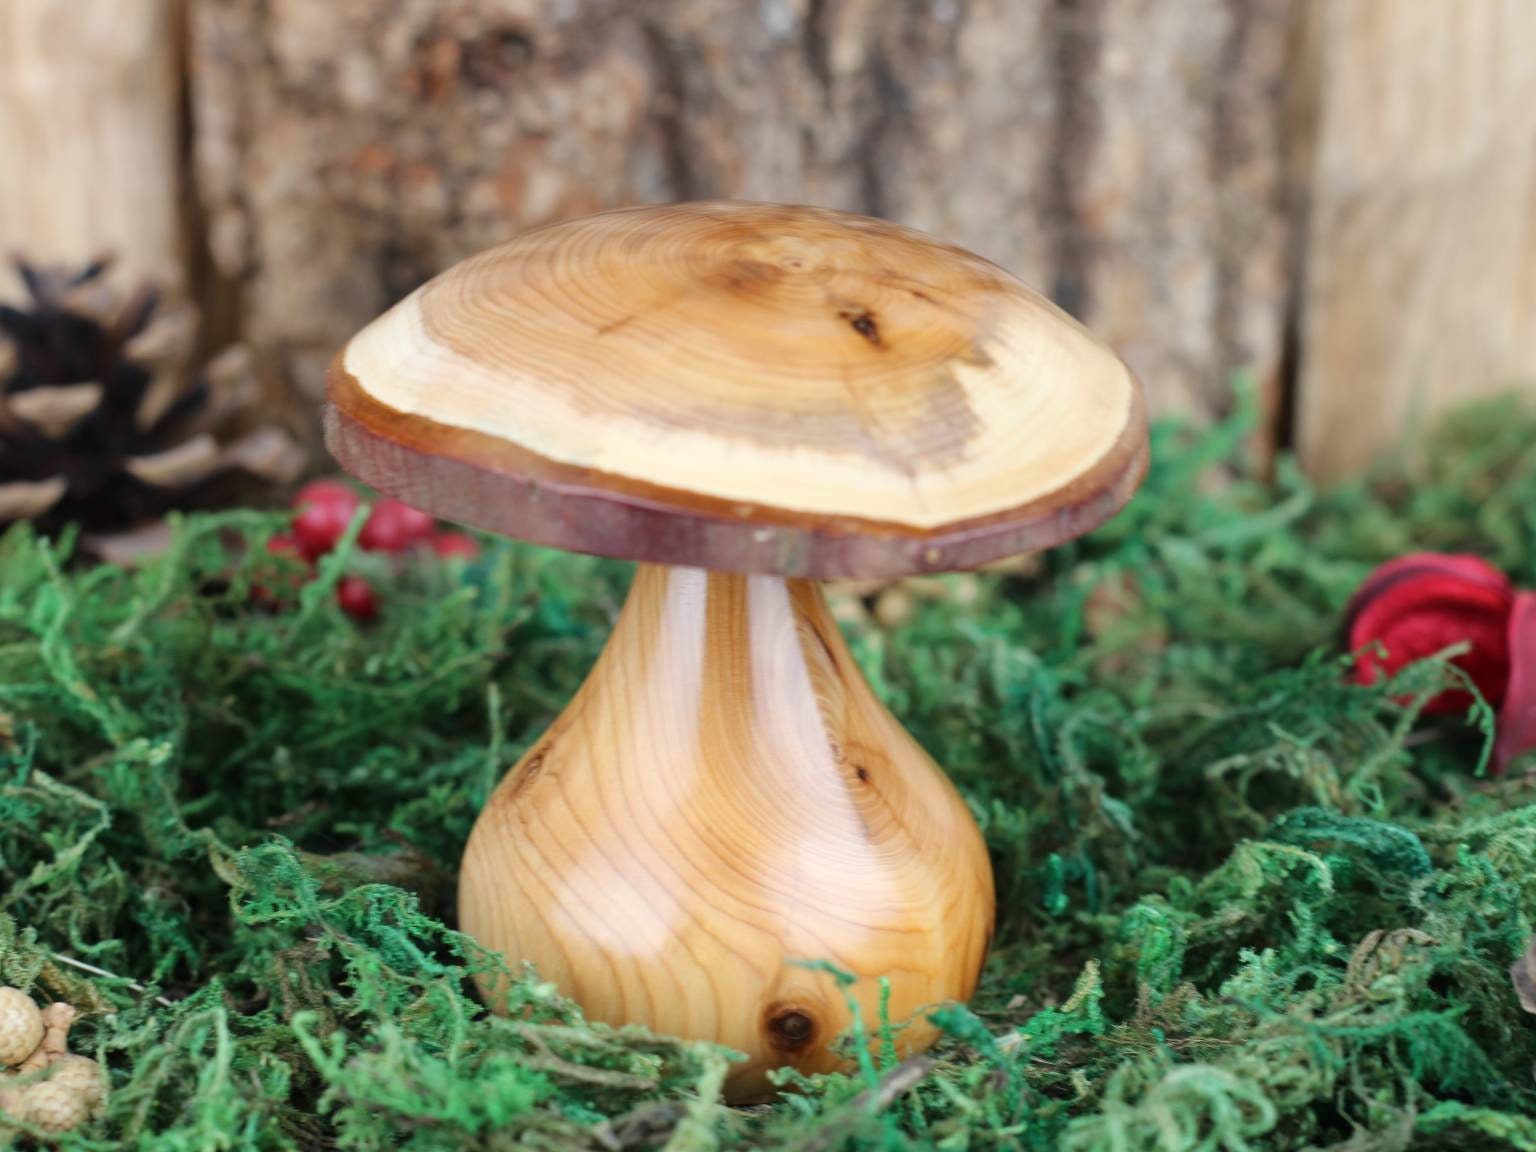 Wooden Turned Mushroom Made From Yew 15 Ornamental Fungi Sculpture, Ideal  Present for That Special Person 